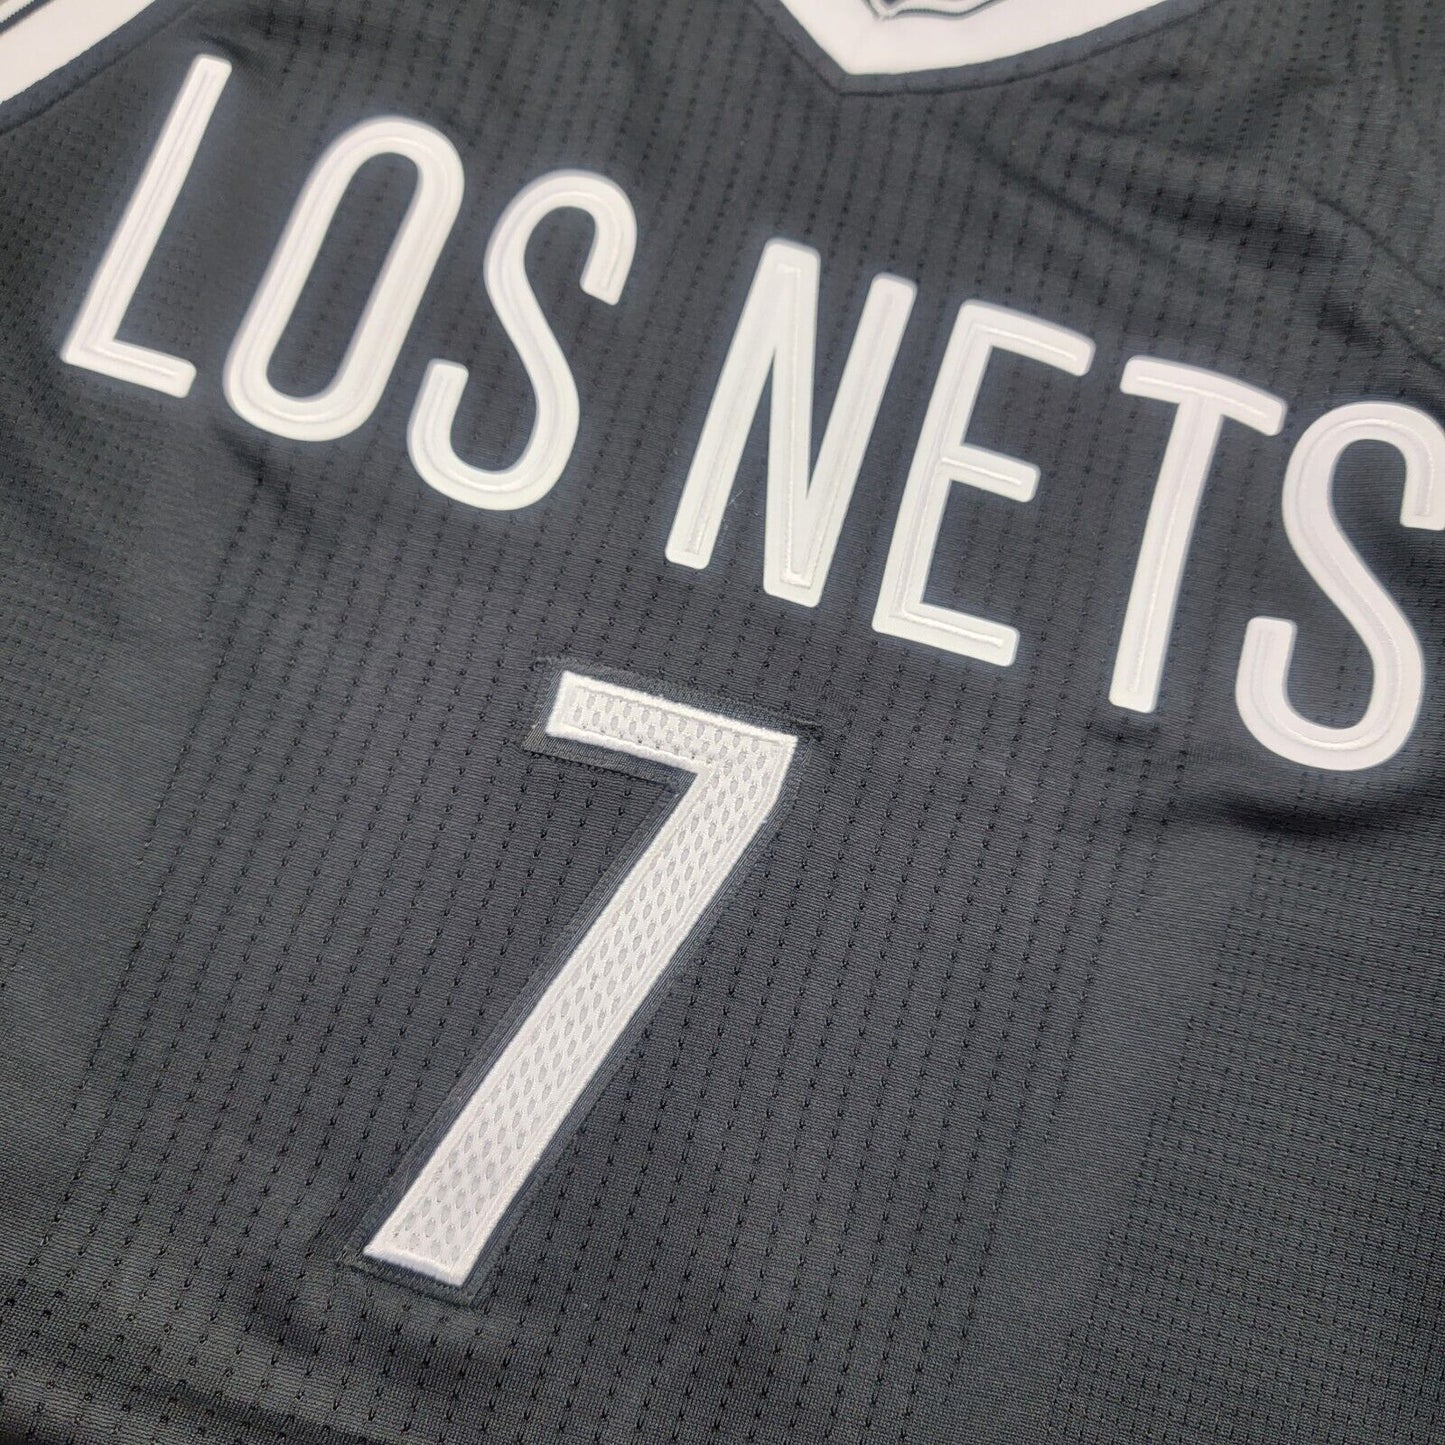 100% Authentic Jeremy Lin Adidas Brooklyn Los Nets Pro Cut Game Jersey Size L+2"